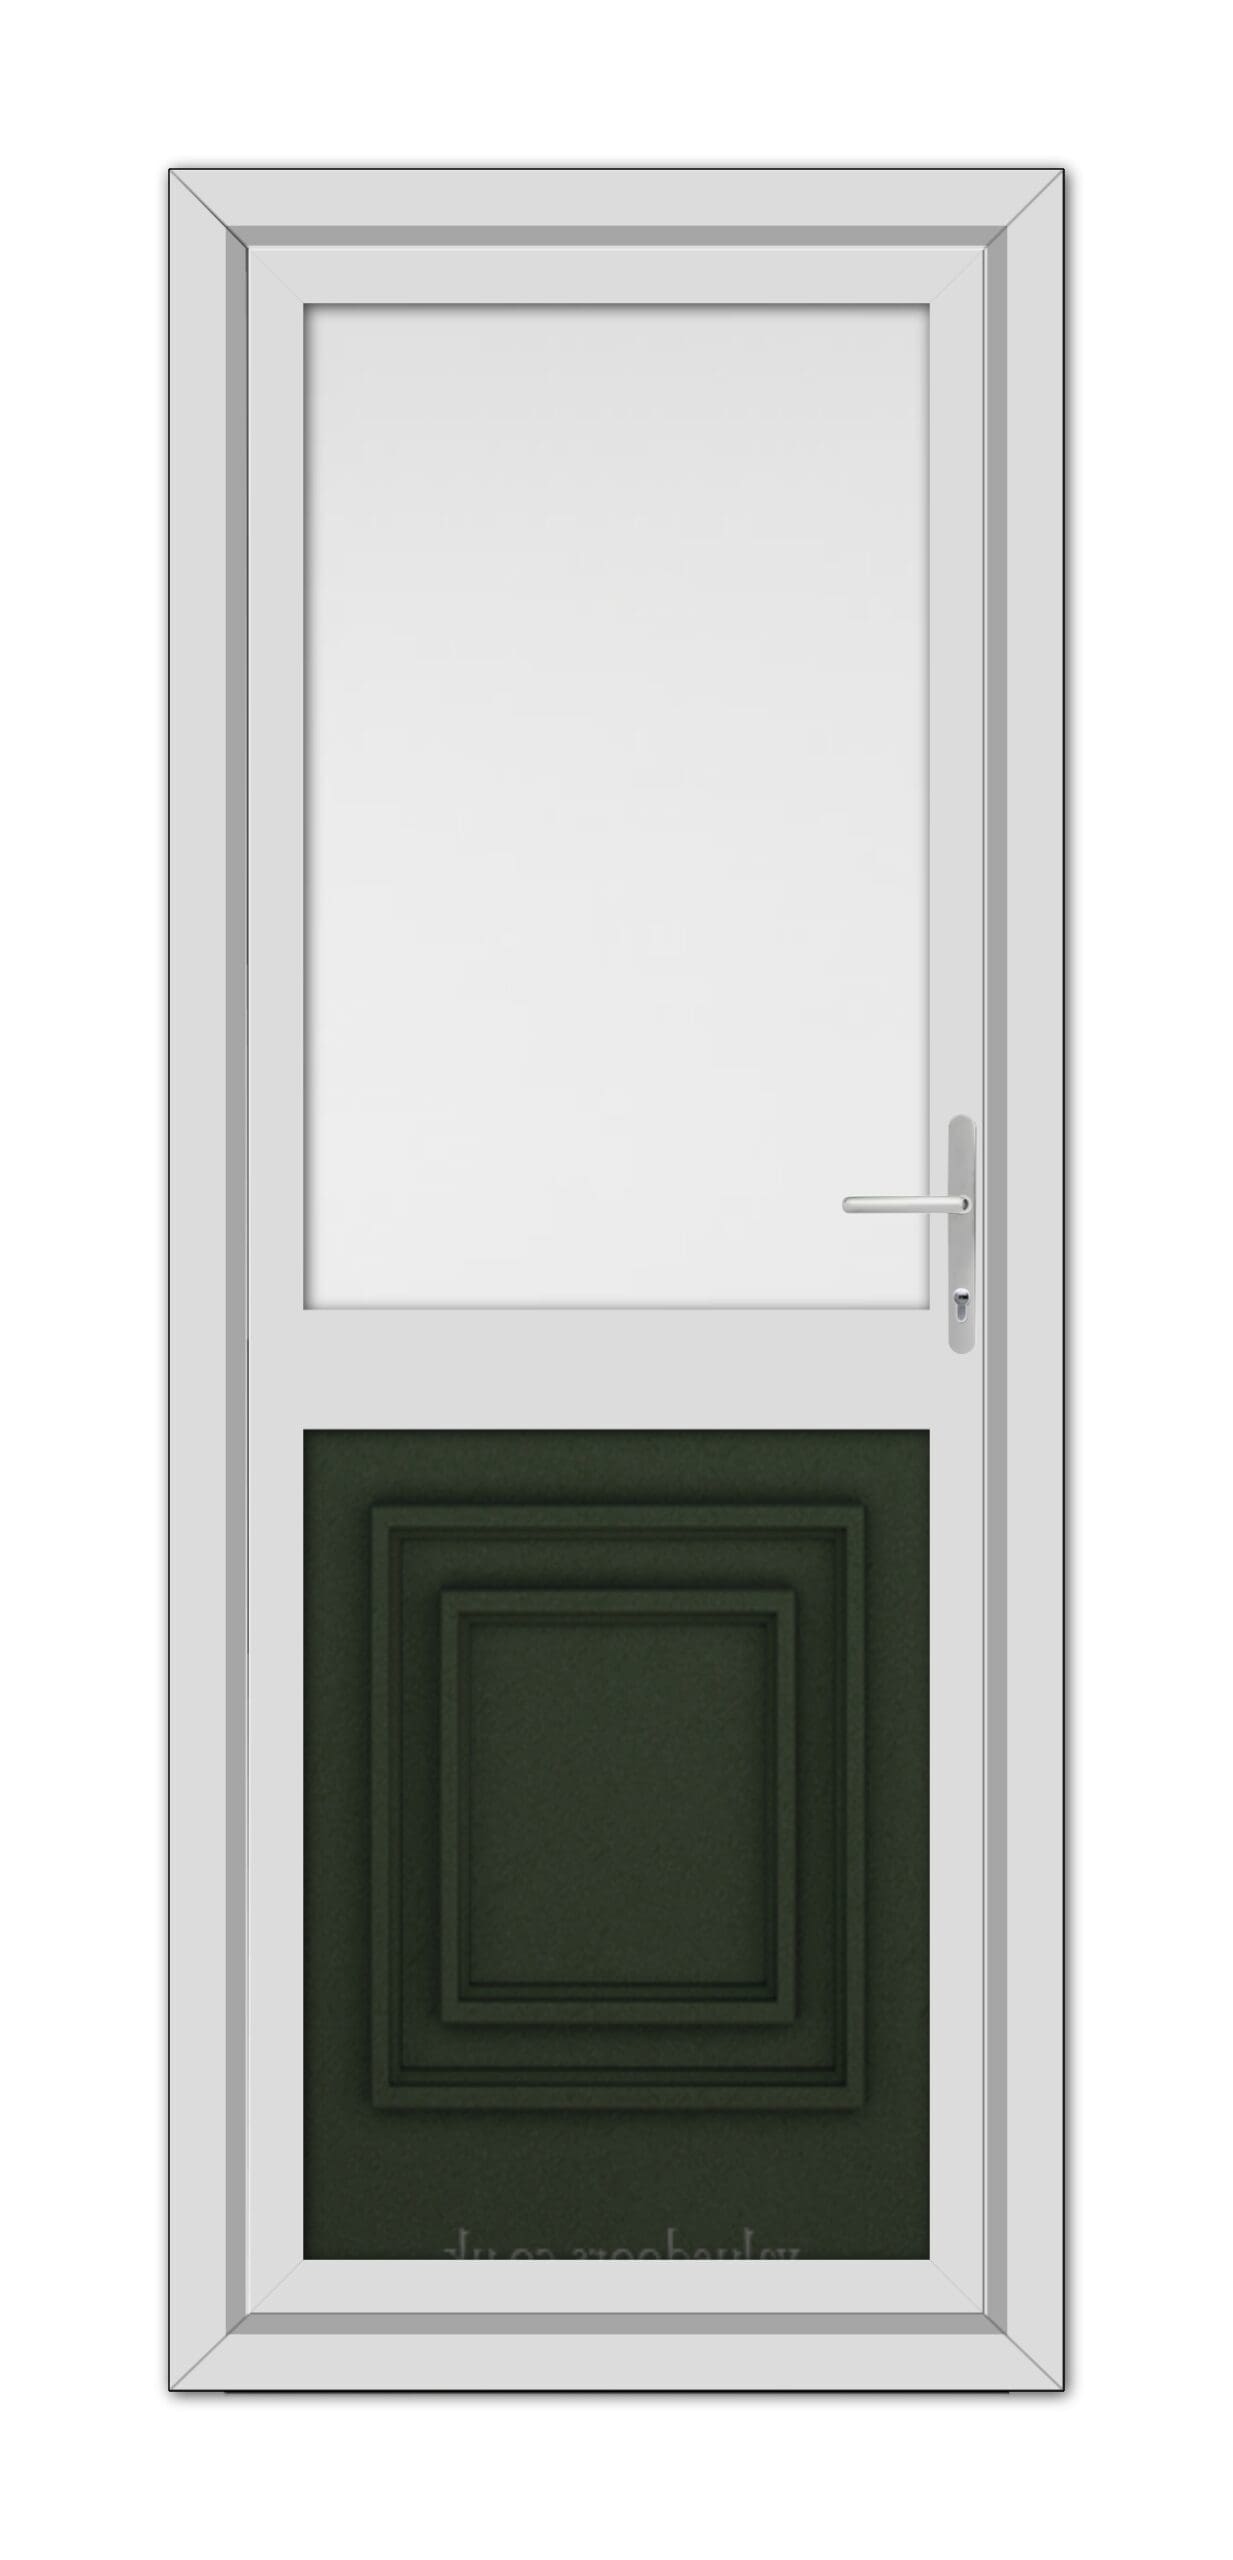 A Green Hannover Half uPVC Back Door with a square frosted glass window at the top and a raised green panel at the bottom.